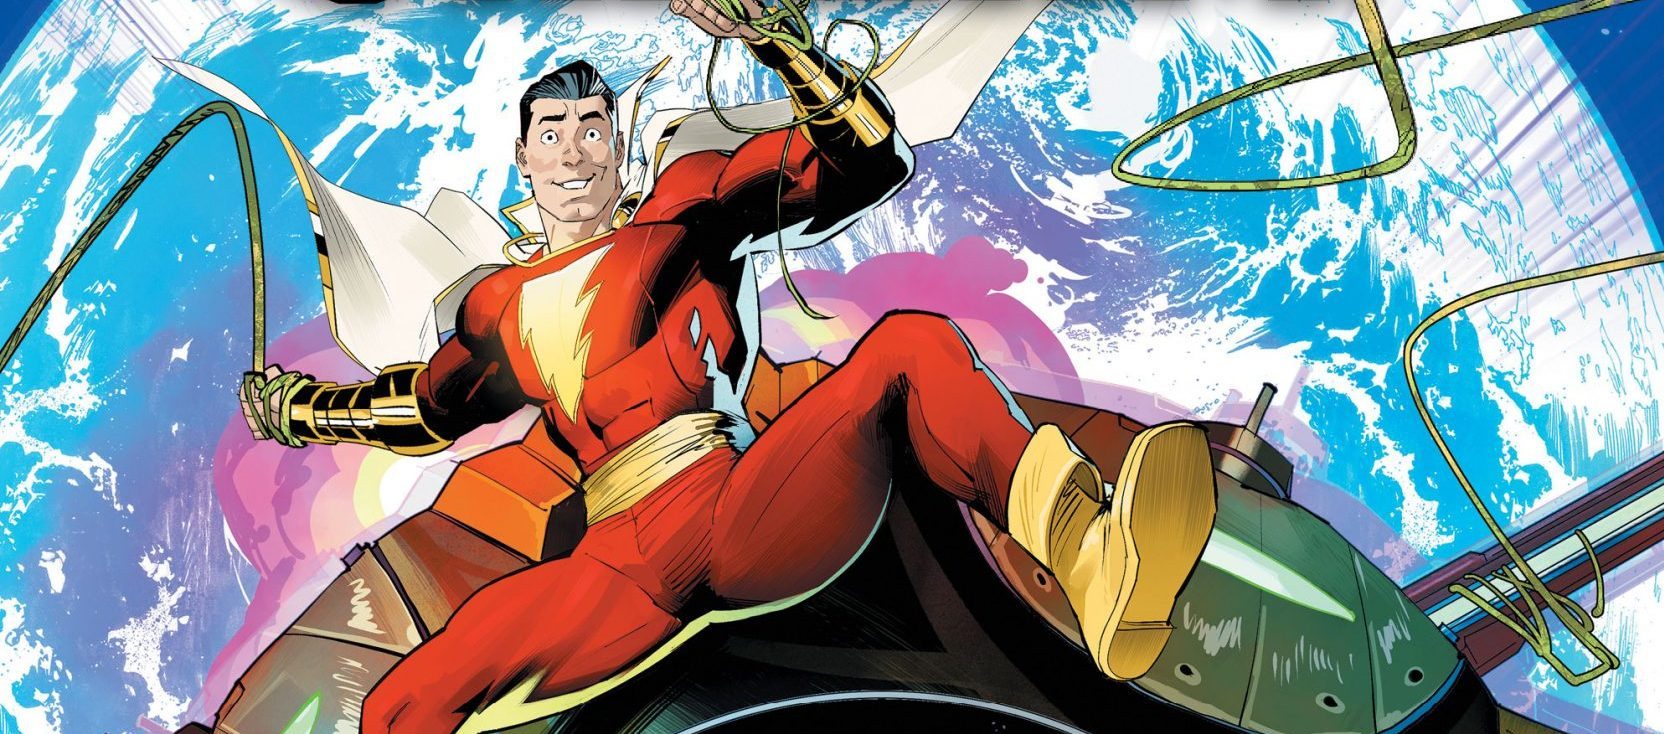 ‘Shazam!’ #3 shows the weight on Billy's shoulders